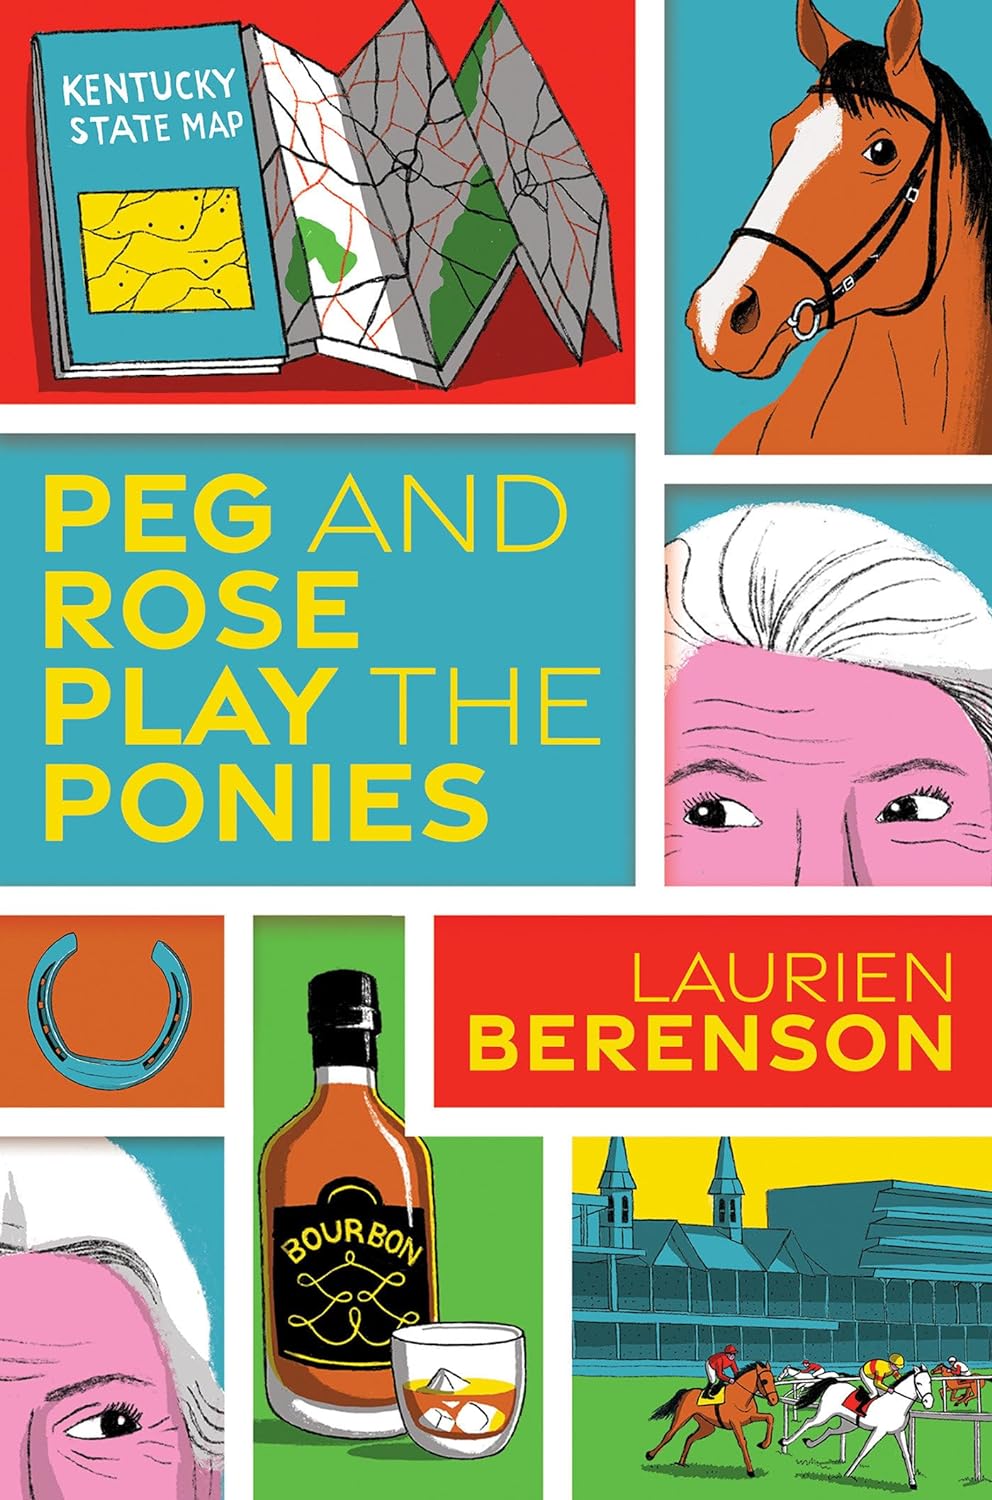 Image for "Peg and Rose Play the Ponies"